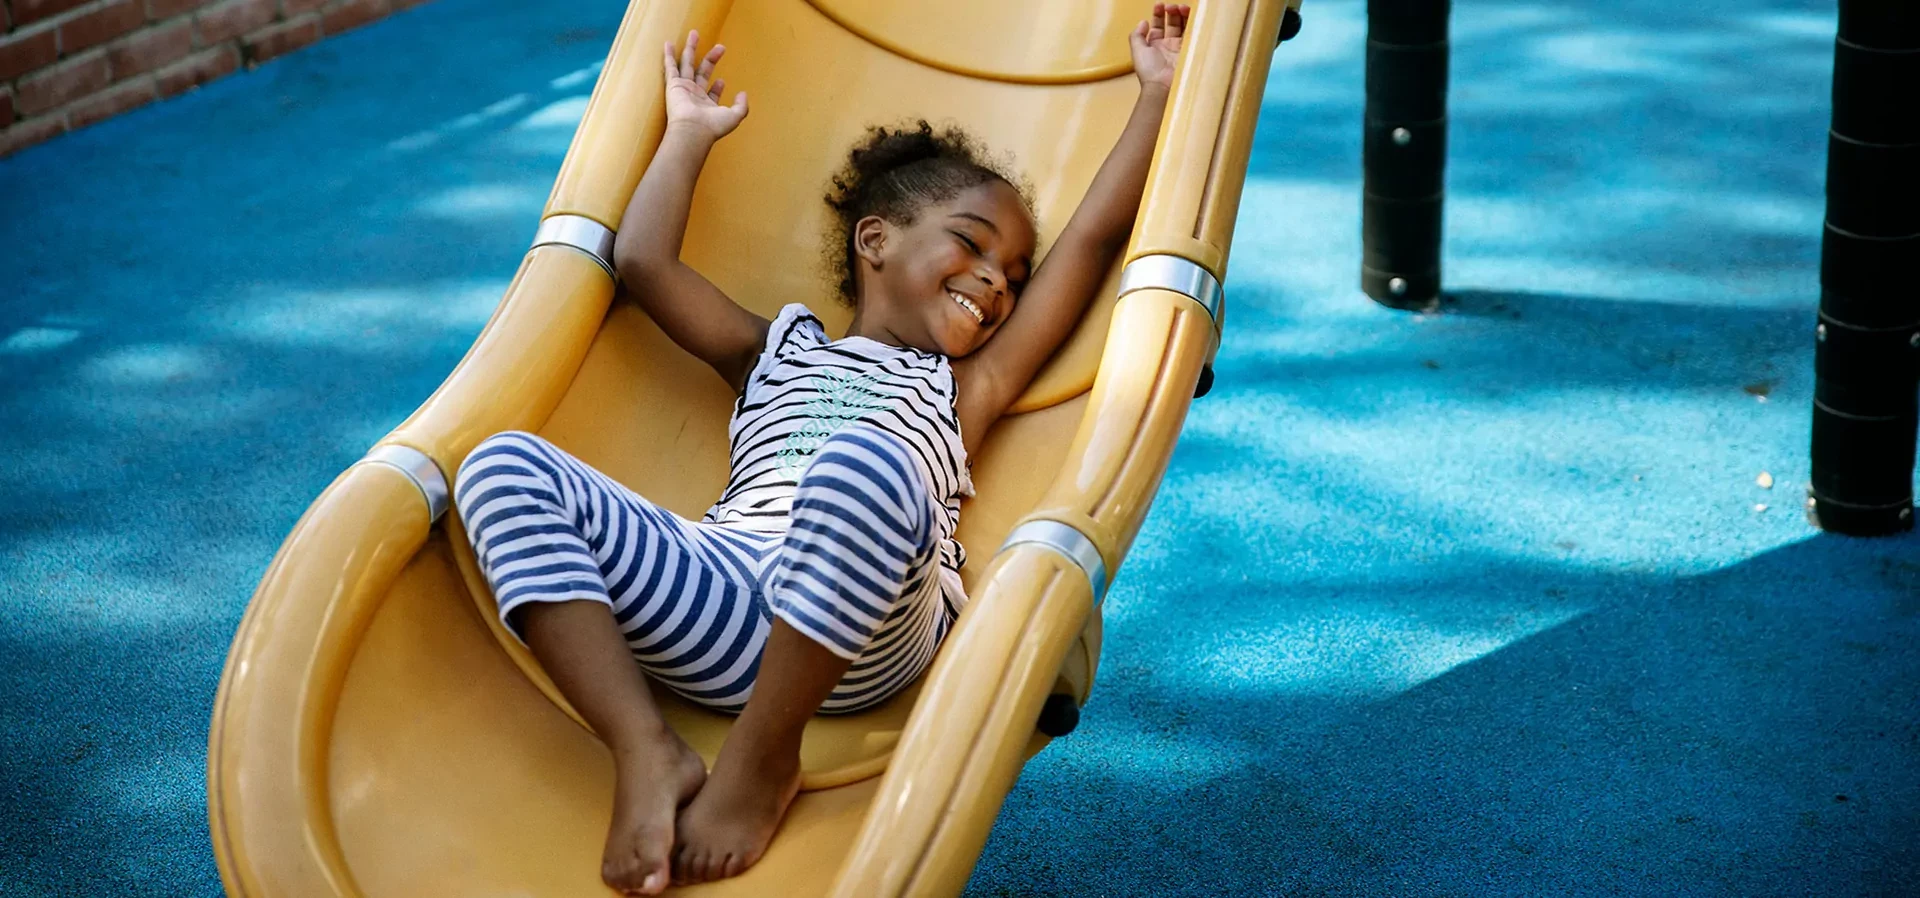 A girl sliding down a playground slide in a park